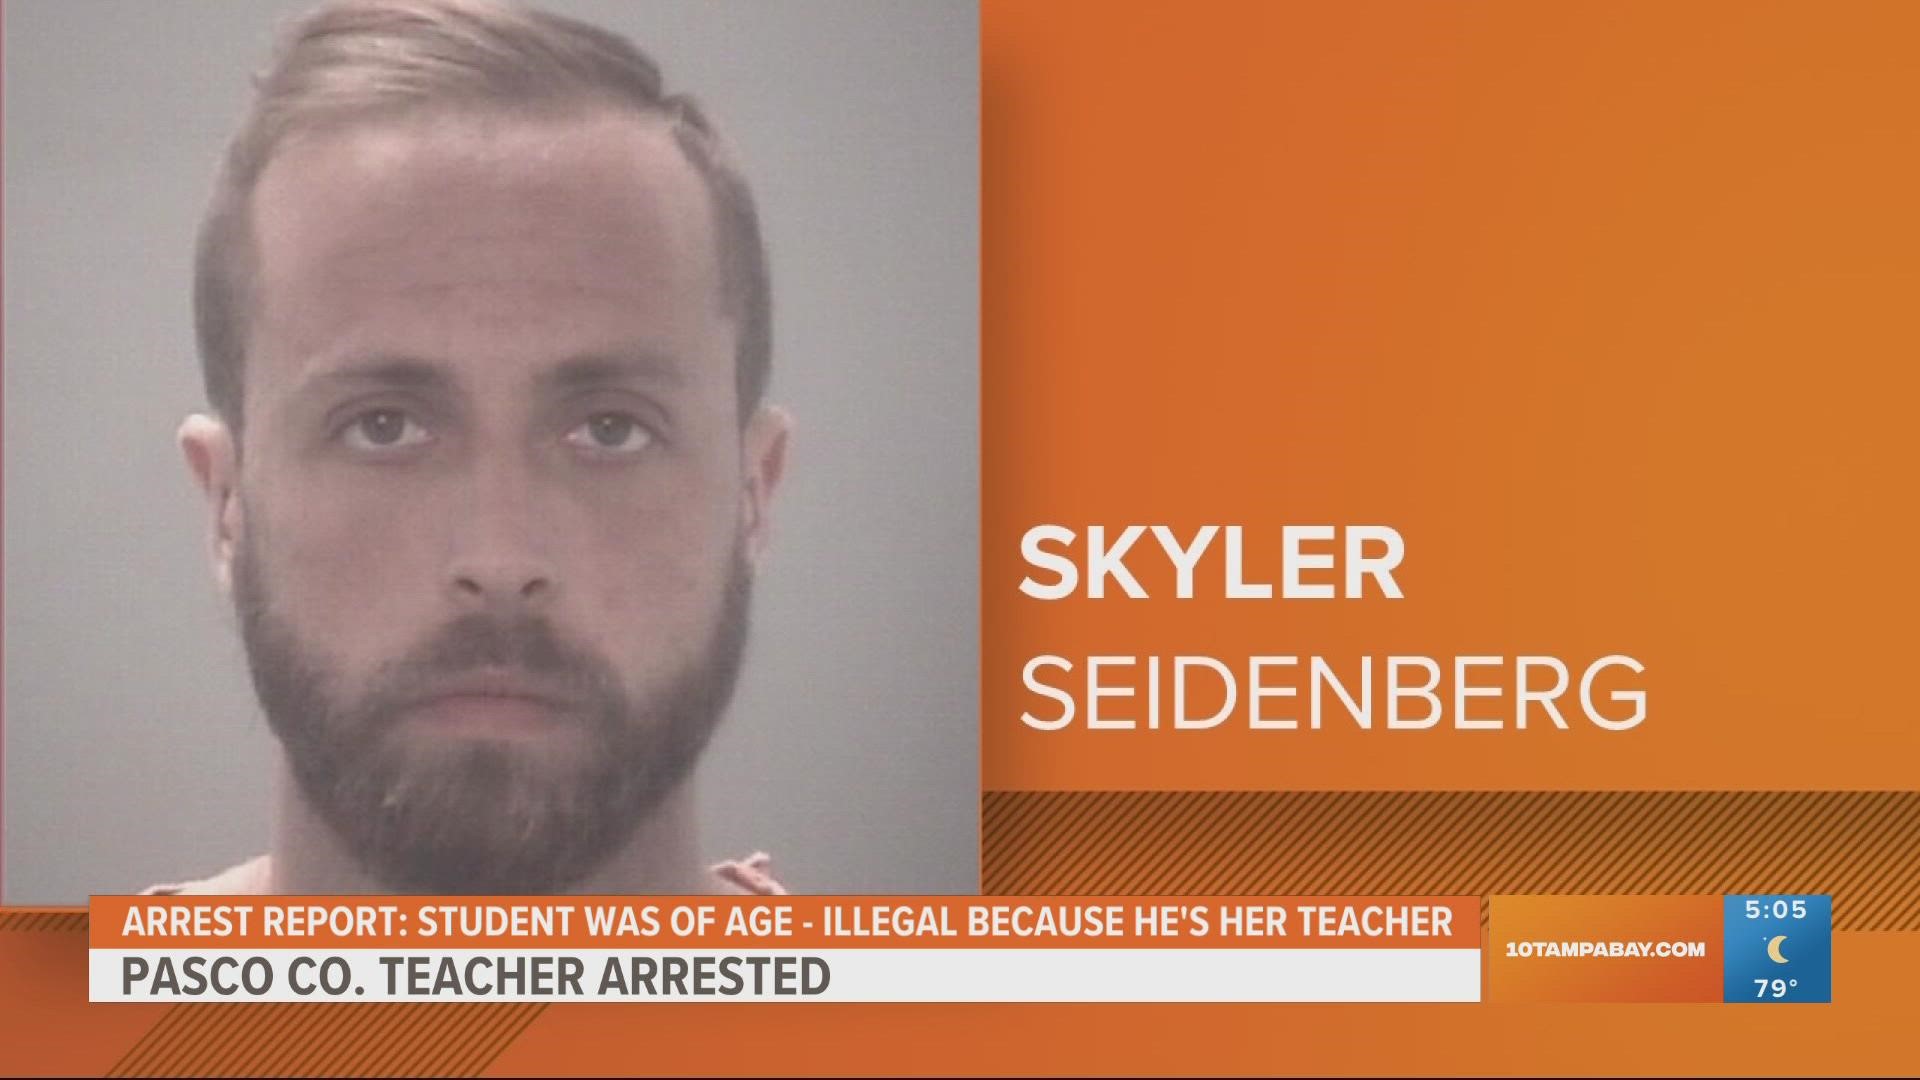 The teacher is charged with an authority figure soliciting to engage in sexual conduct.